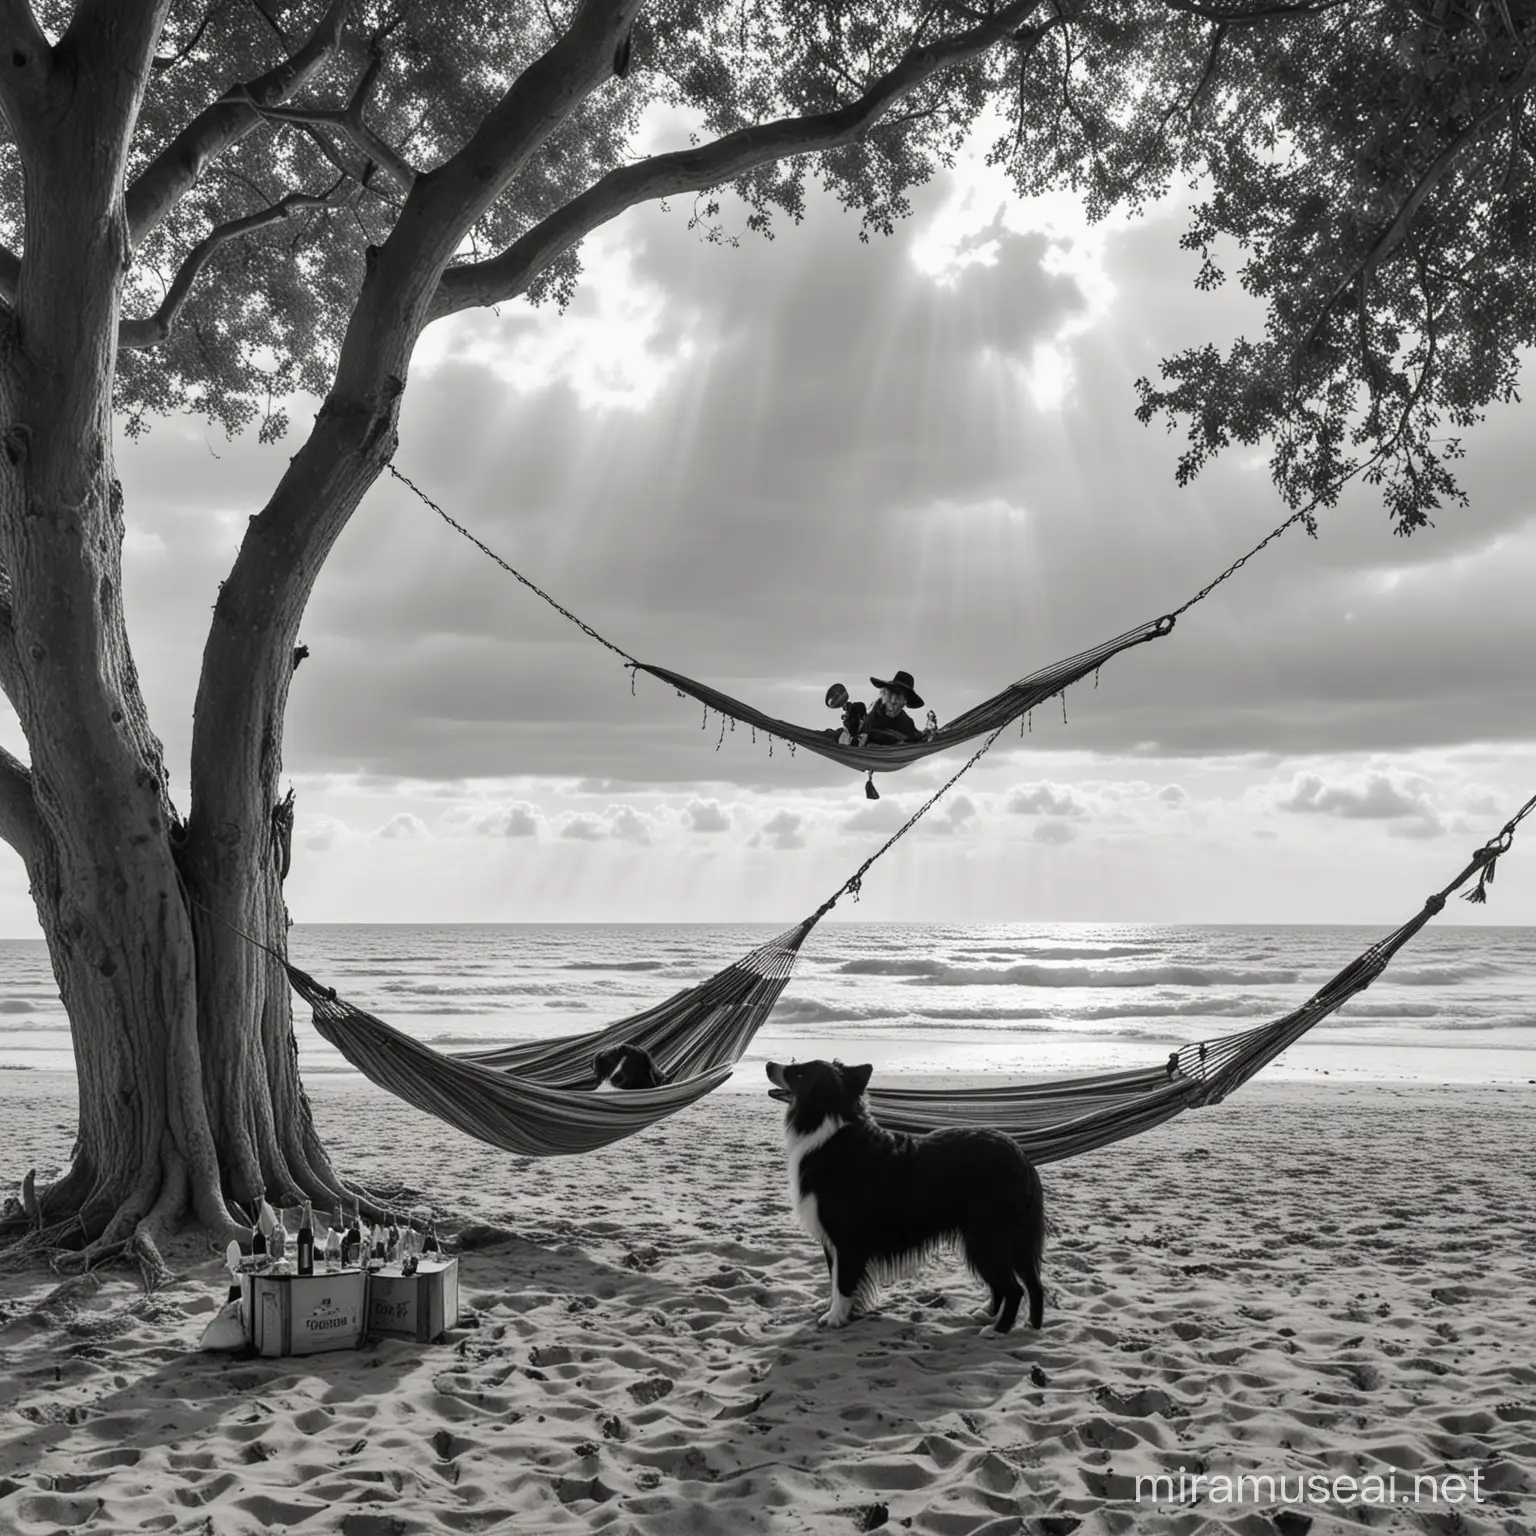 Elderly Man in Straw Hat Celebrates 77th Birthday on Beach Hammock with Sea Monster and Collie Dog